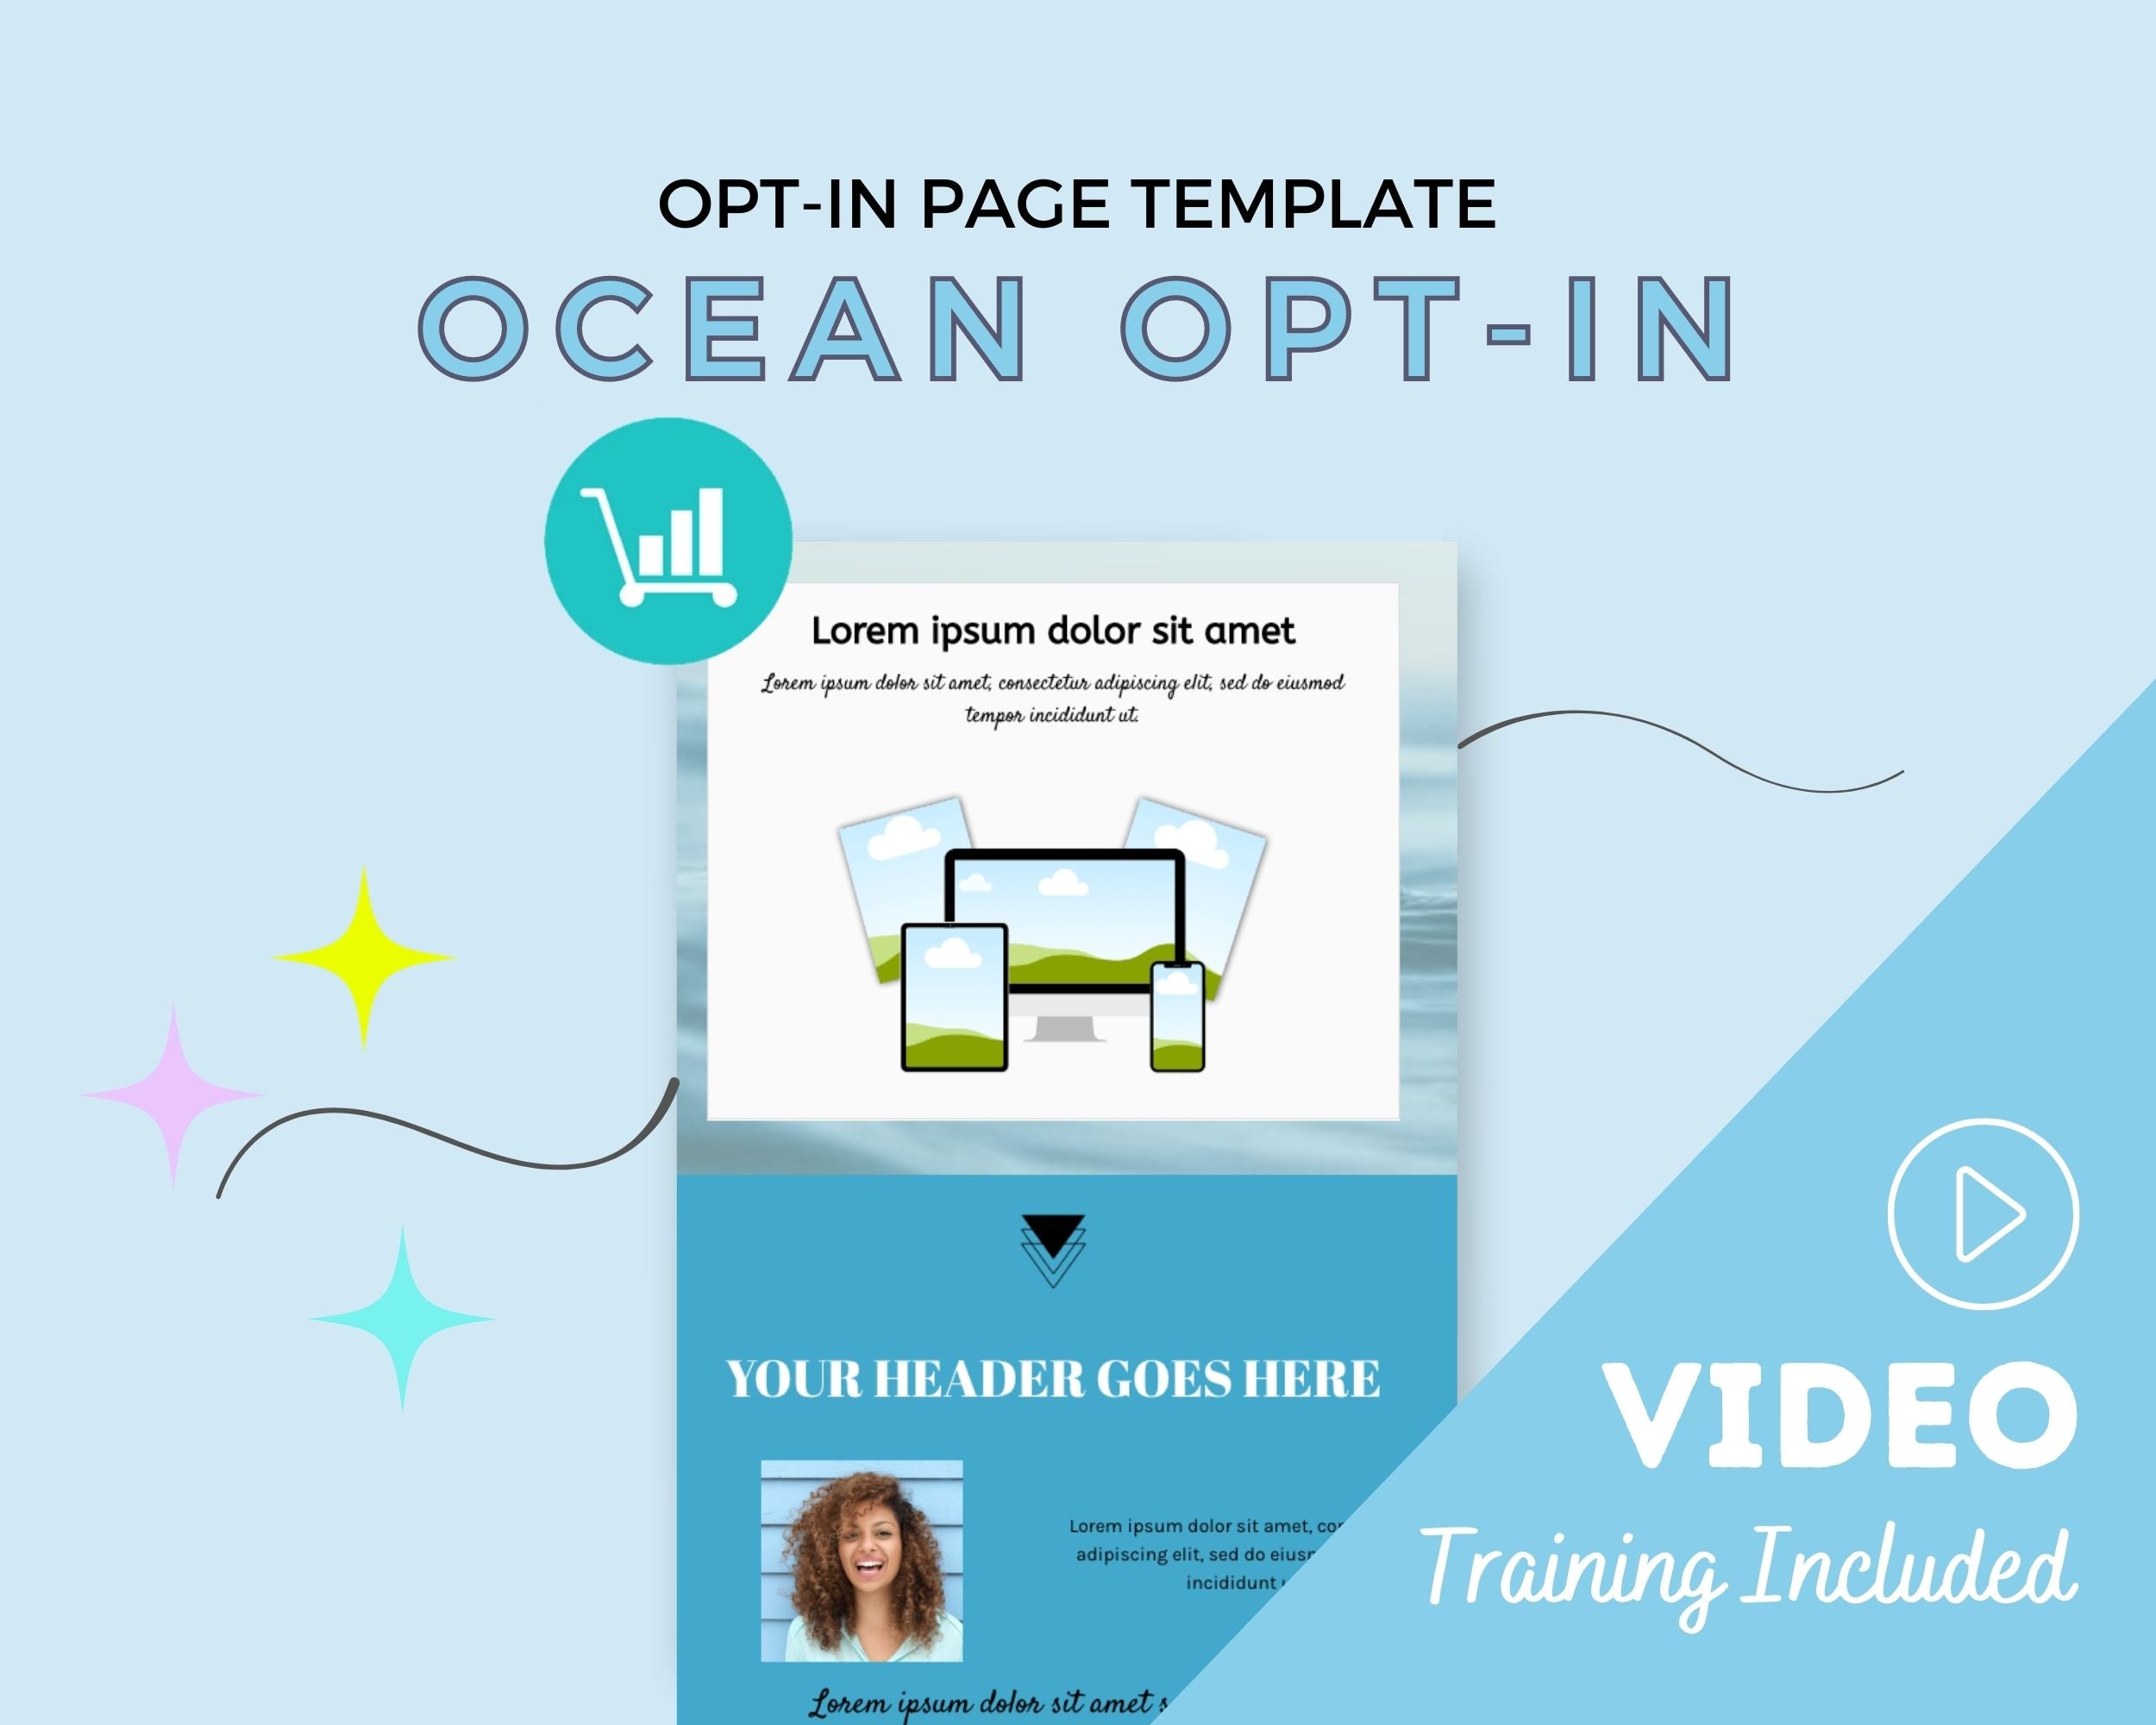 Ocean ThriveCart Opt-In Page Template